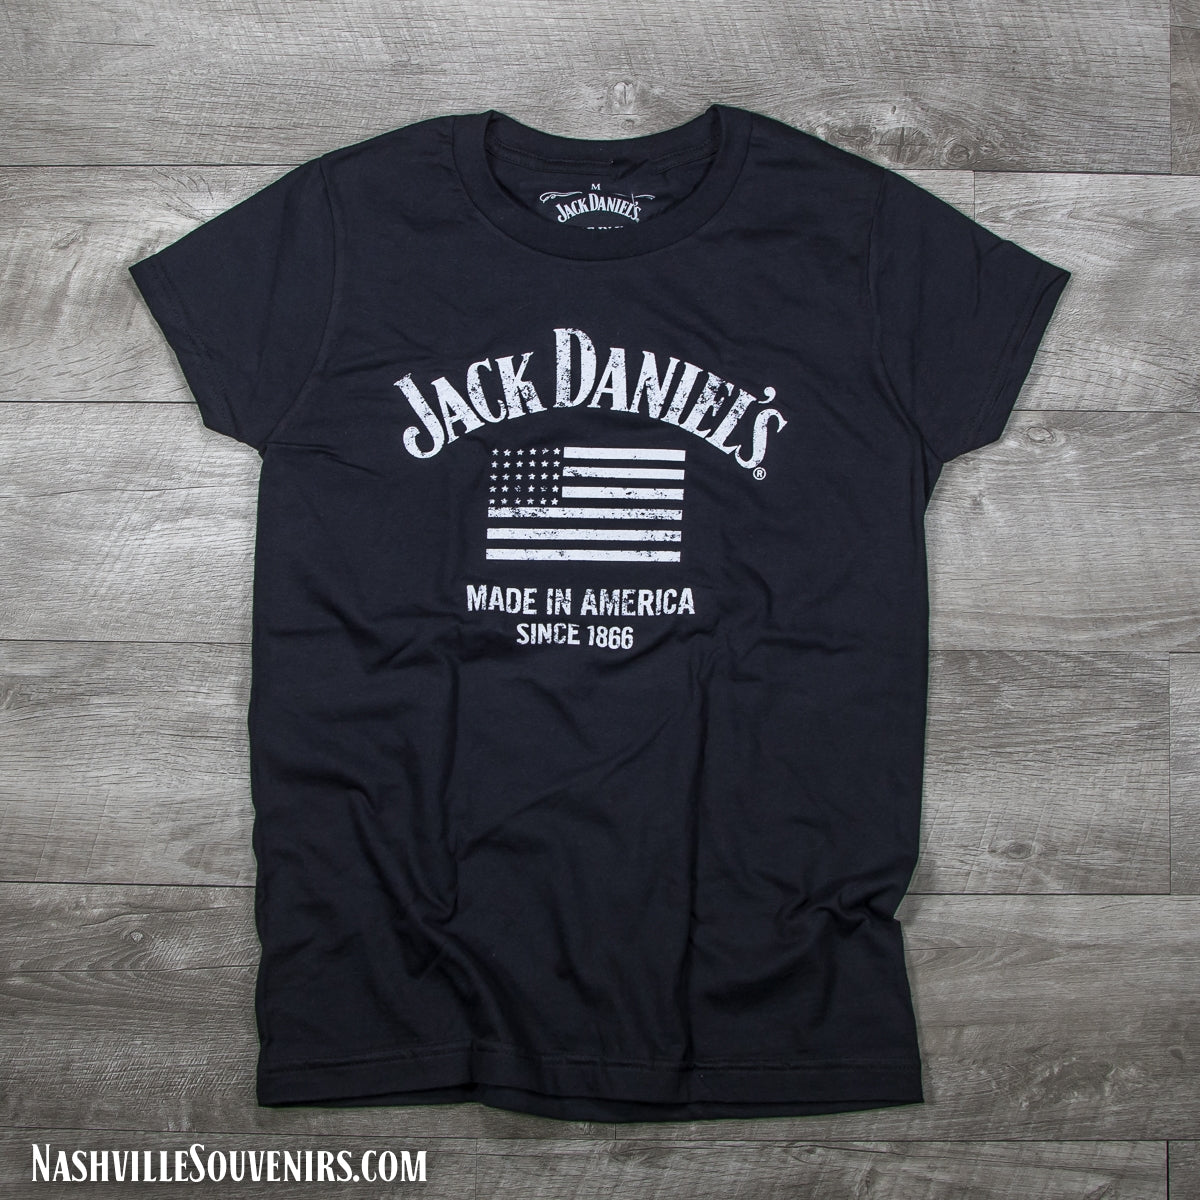 Officially licensed ladies Jack Daniels Made in America Flag Tank Top featuring a white American flag on a black tank top. Get yours today with FREE SHIPPING on all US orders over $75!